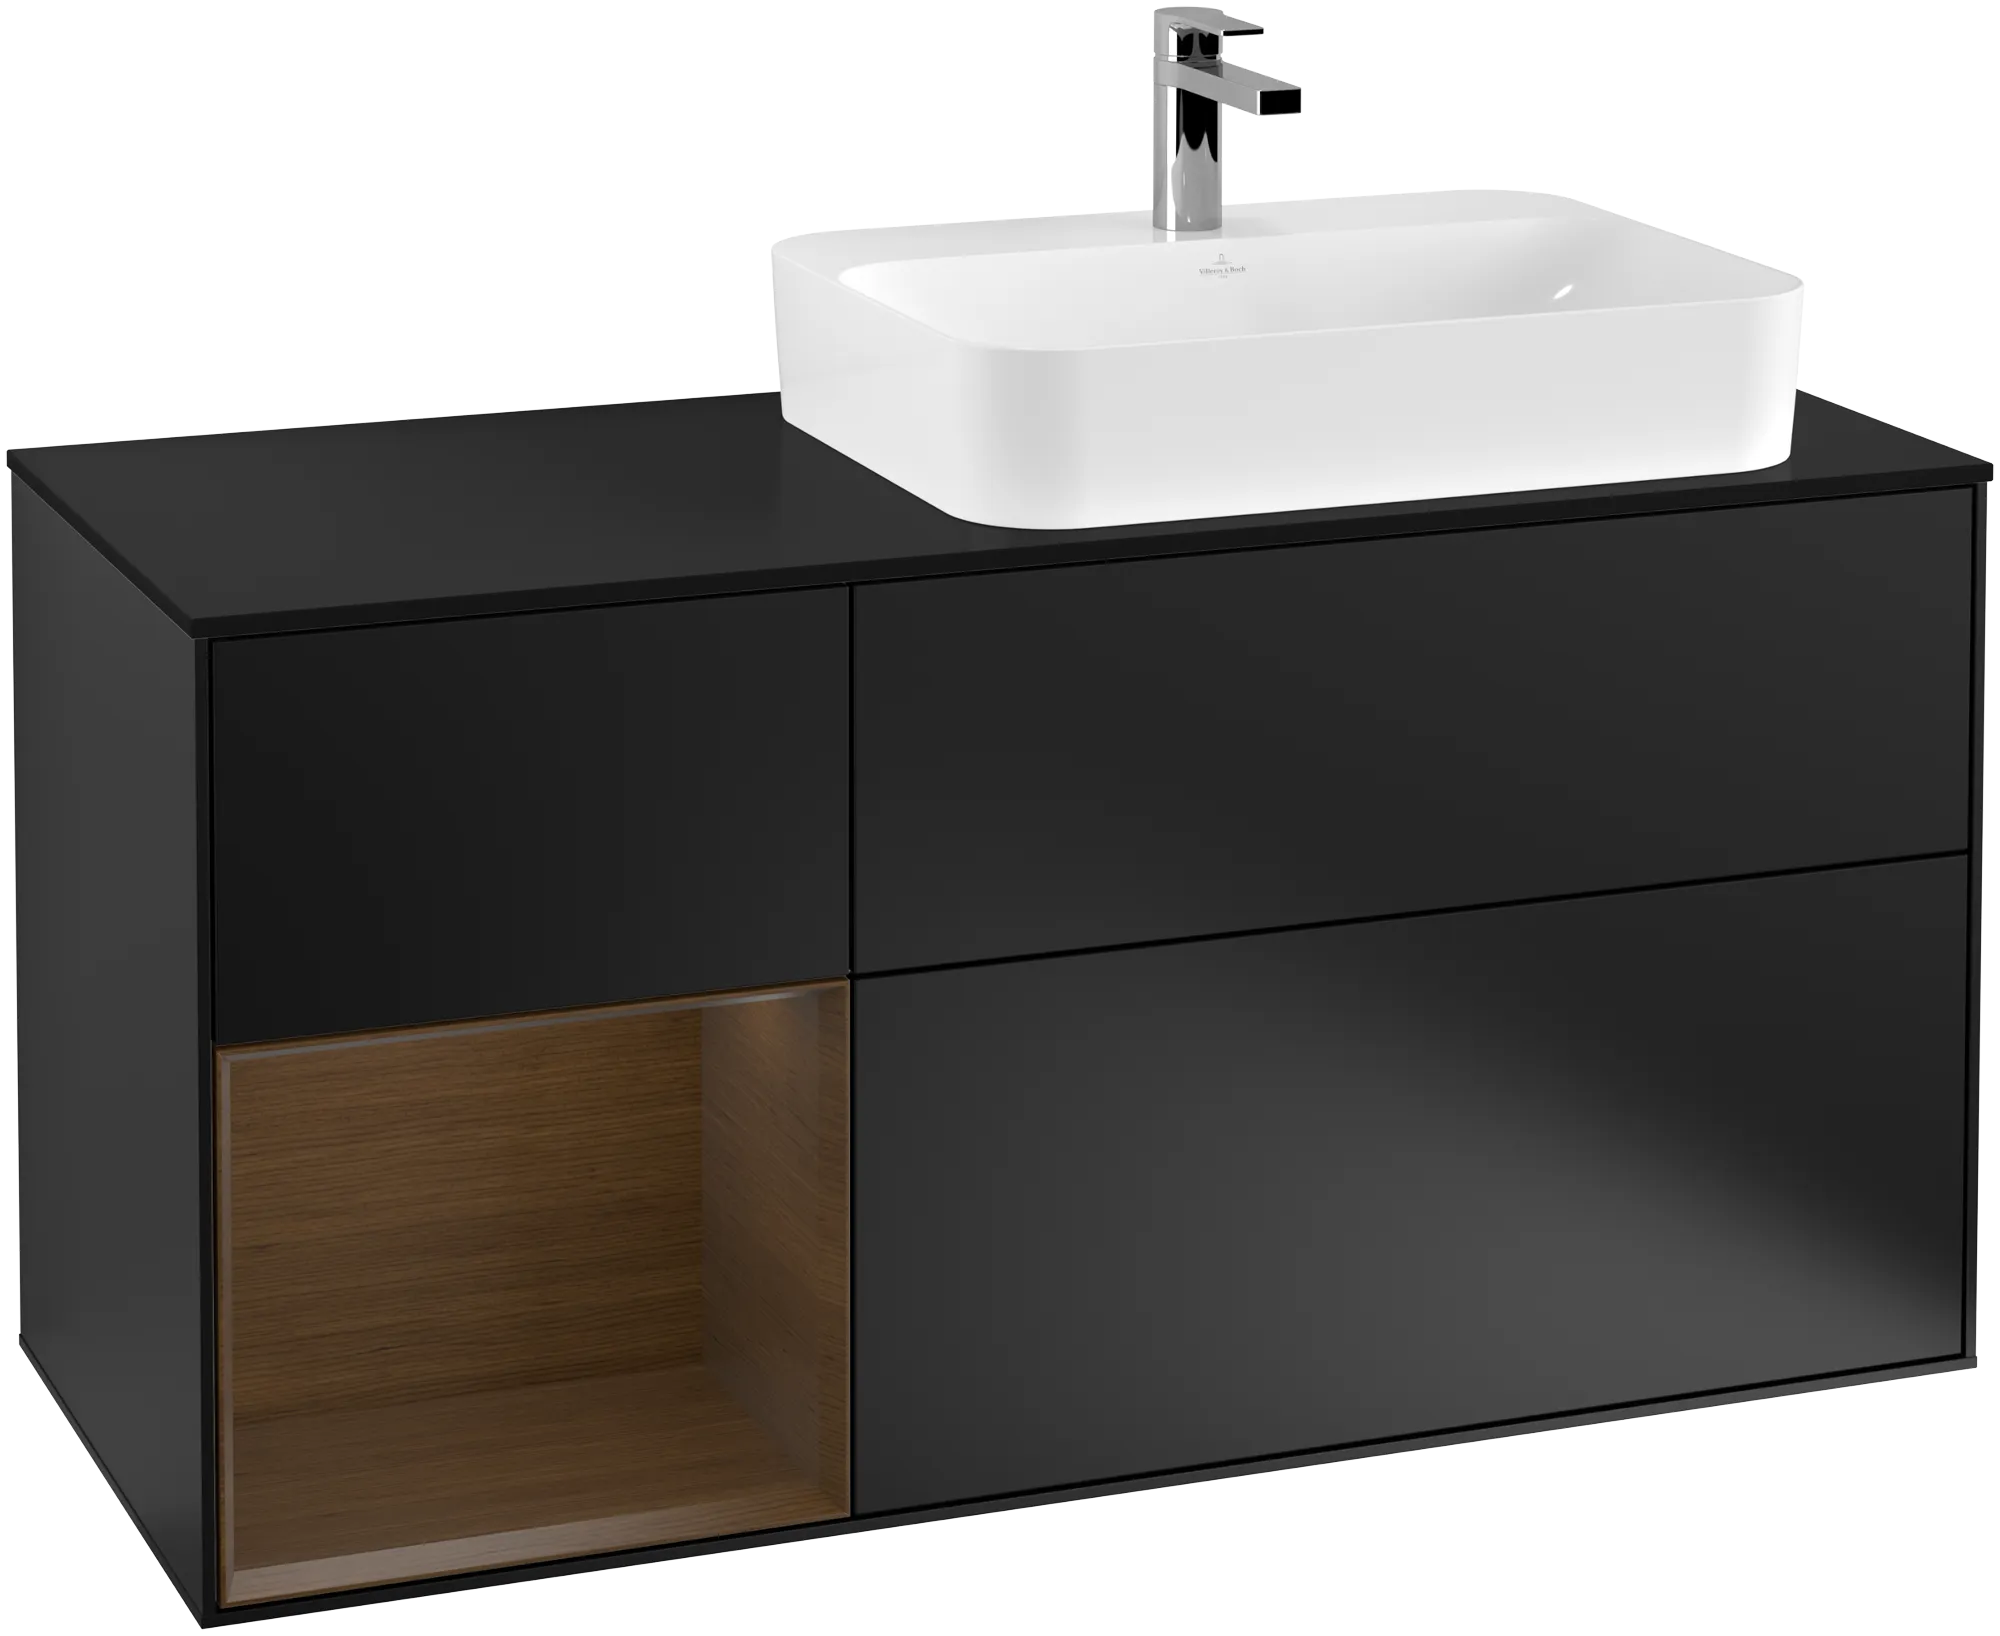 Picture of VILLEROY BOCH Finion Vanity unit, with lighting, 3 pull-out compartments, 1200 x 603 x 501 mm, Black Matt Lacquer / Walnut Veneer / Glass Black Matt #G392GNPD